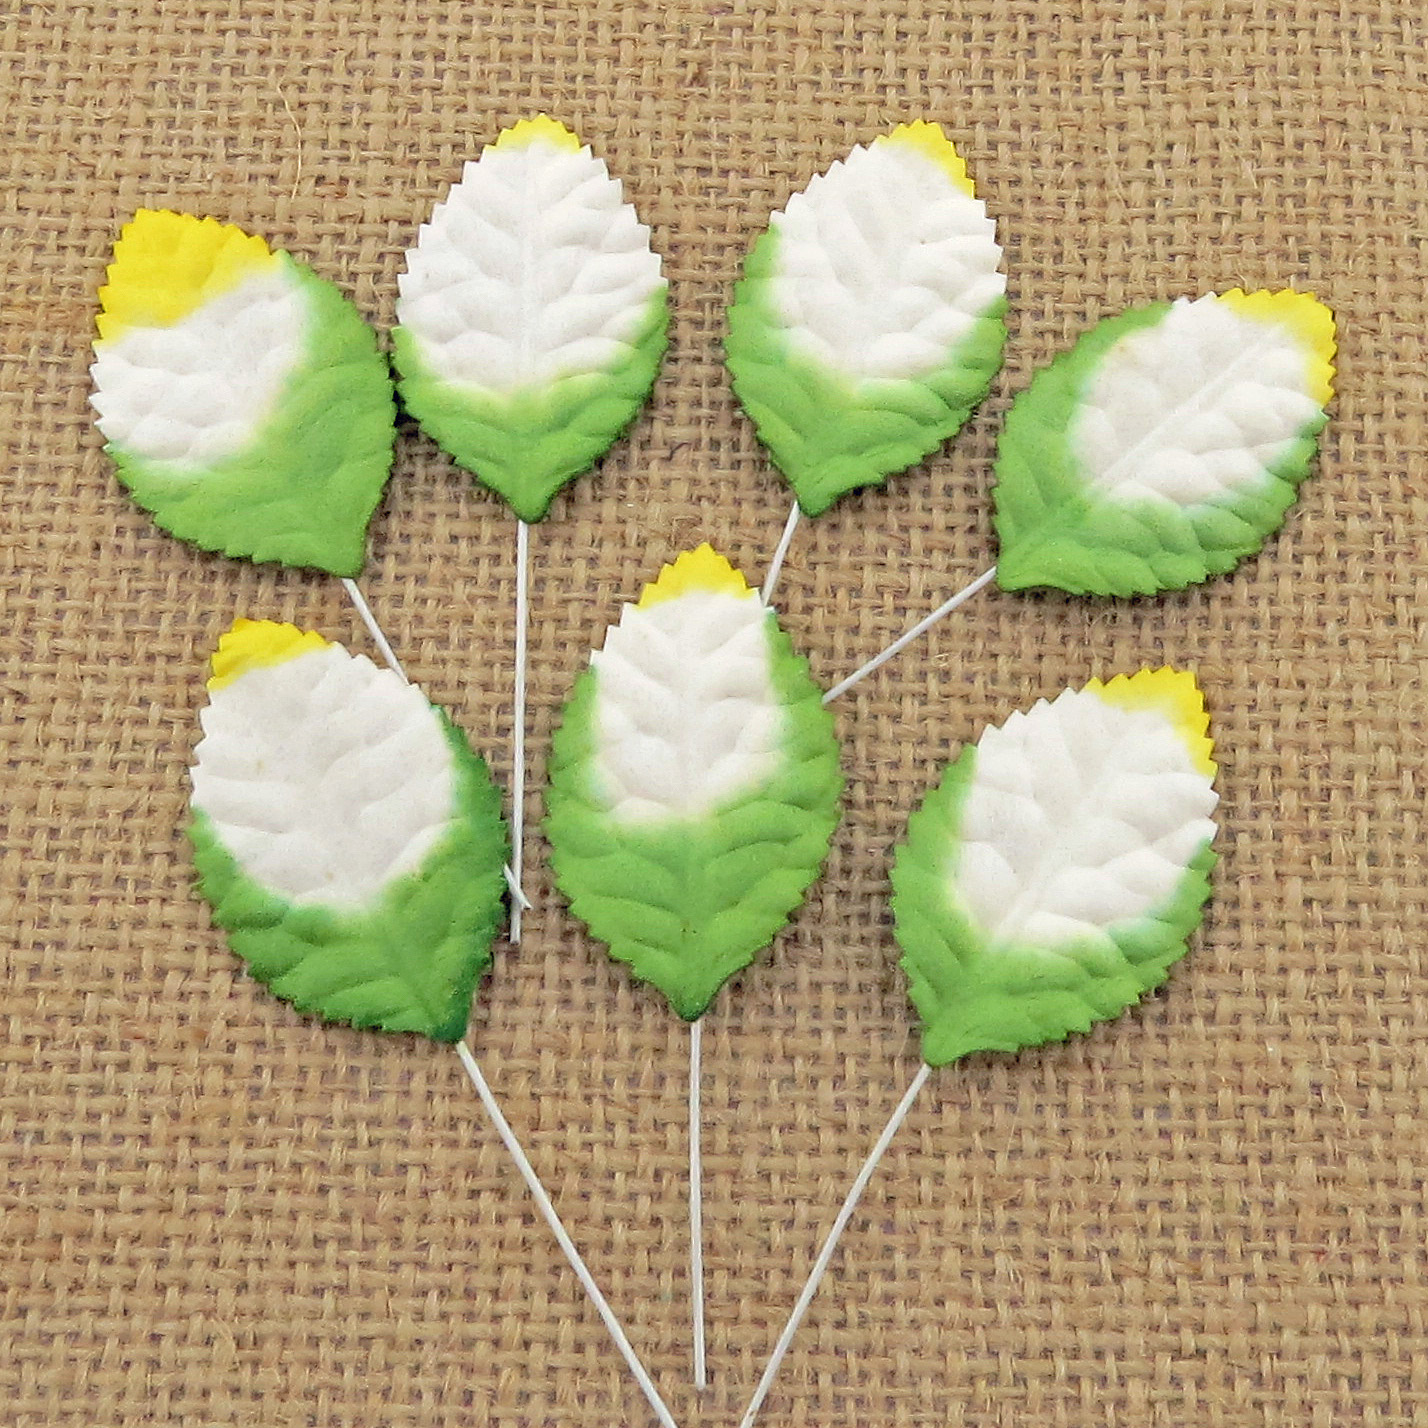 100 2-tone green/white/yellow Mulberry Paper Leaves - 30mm